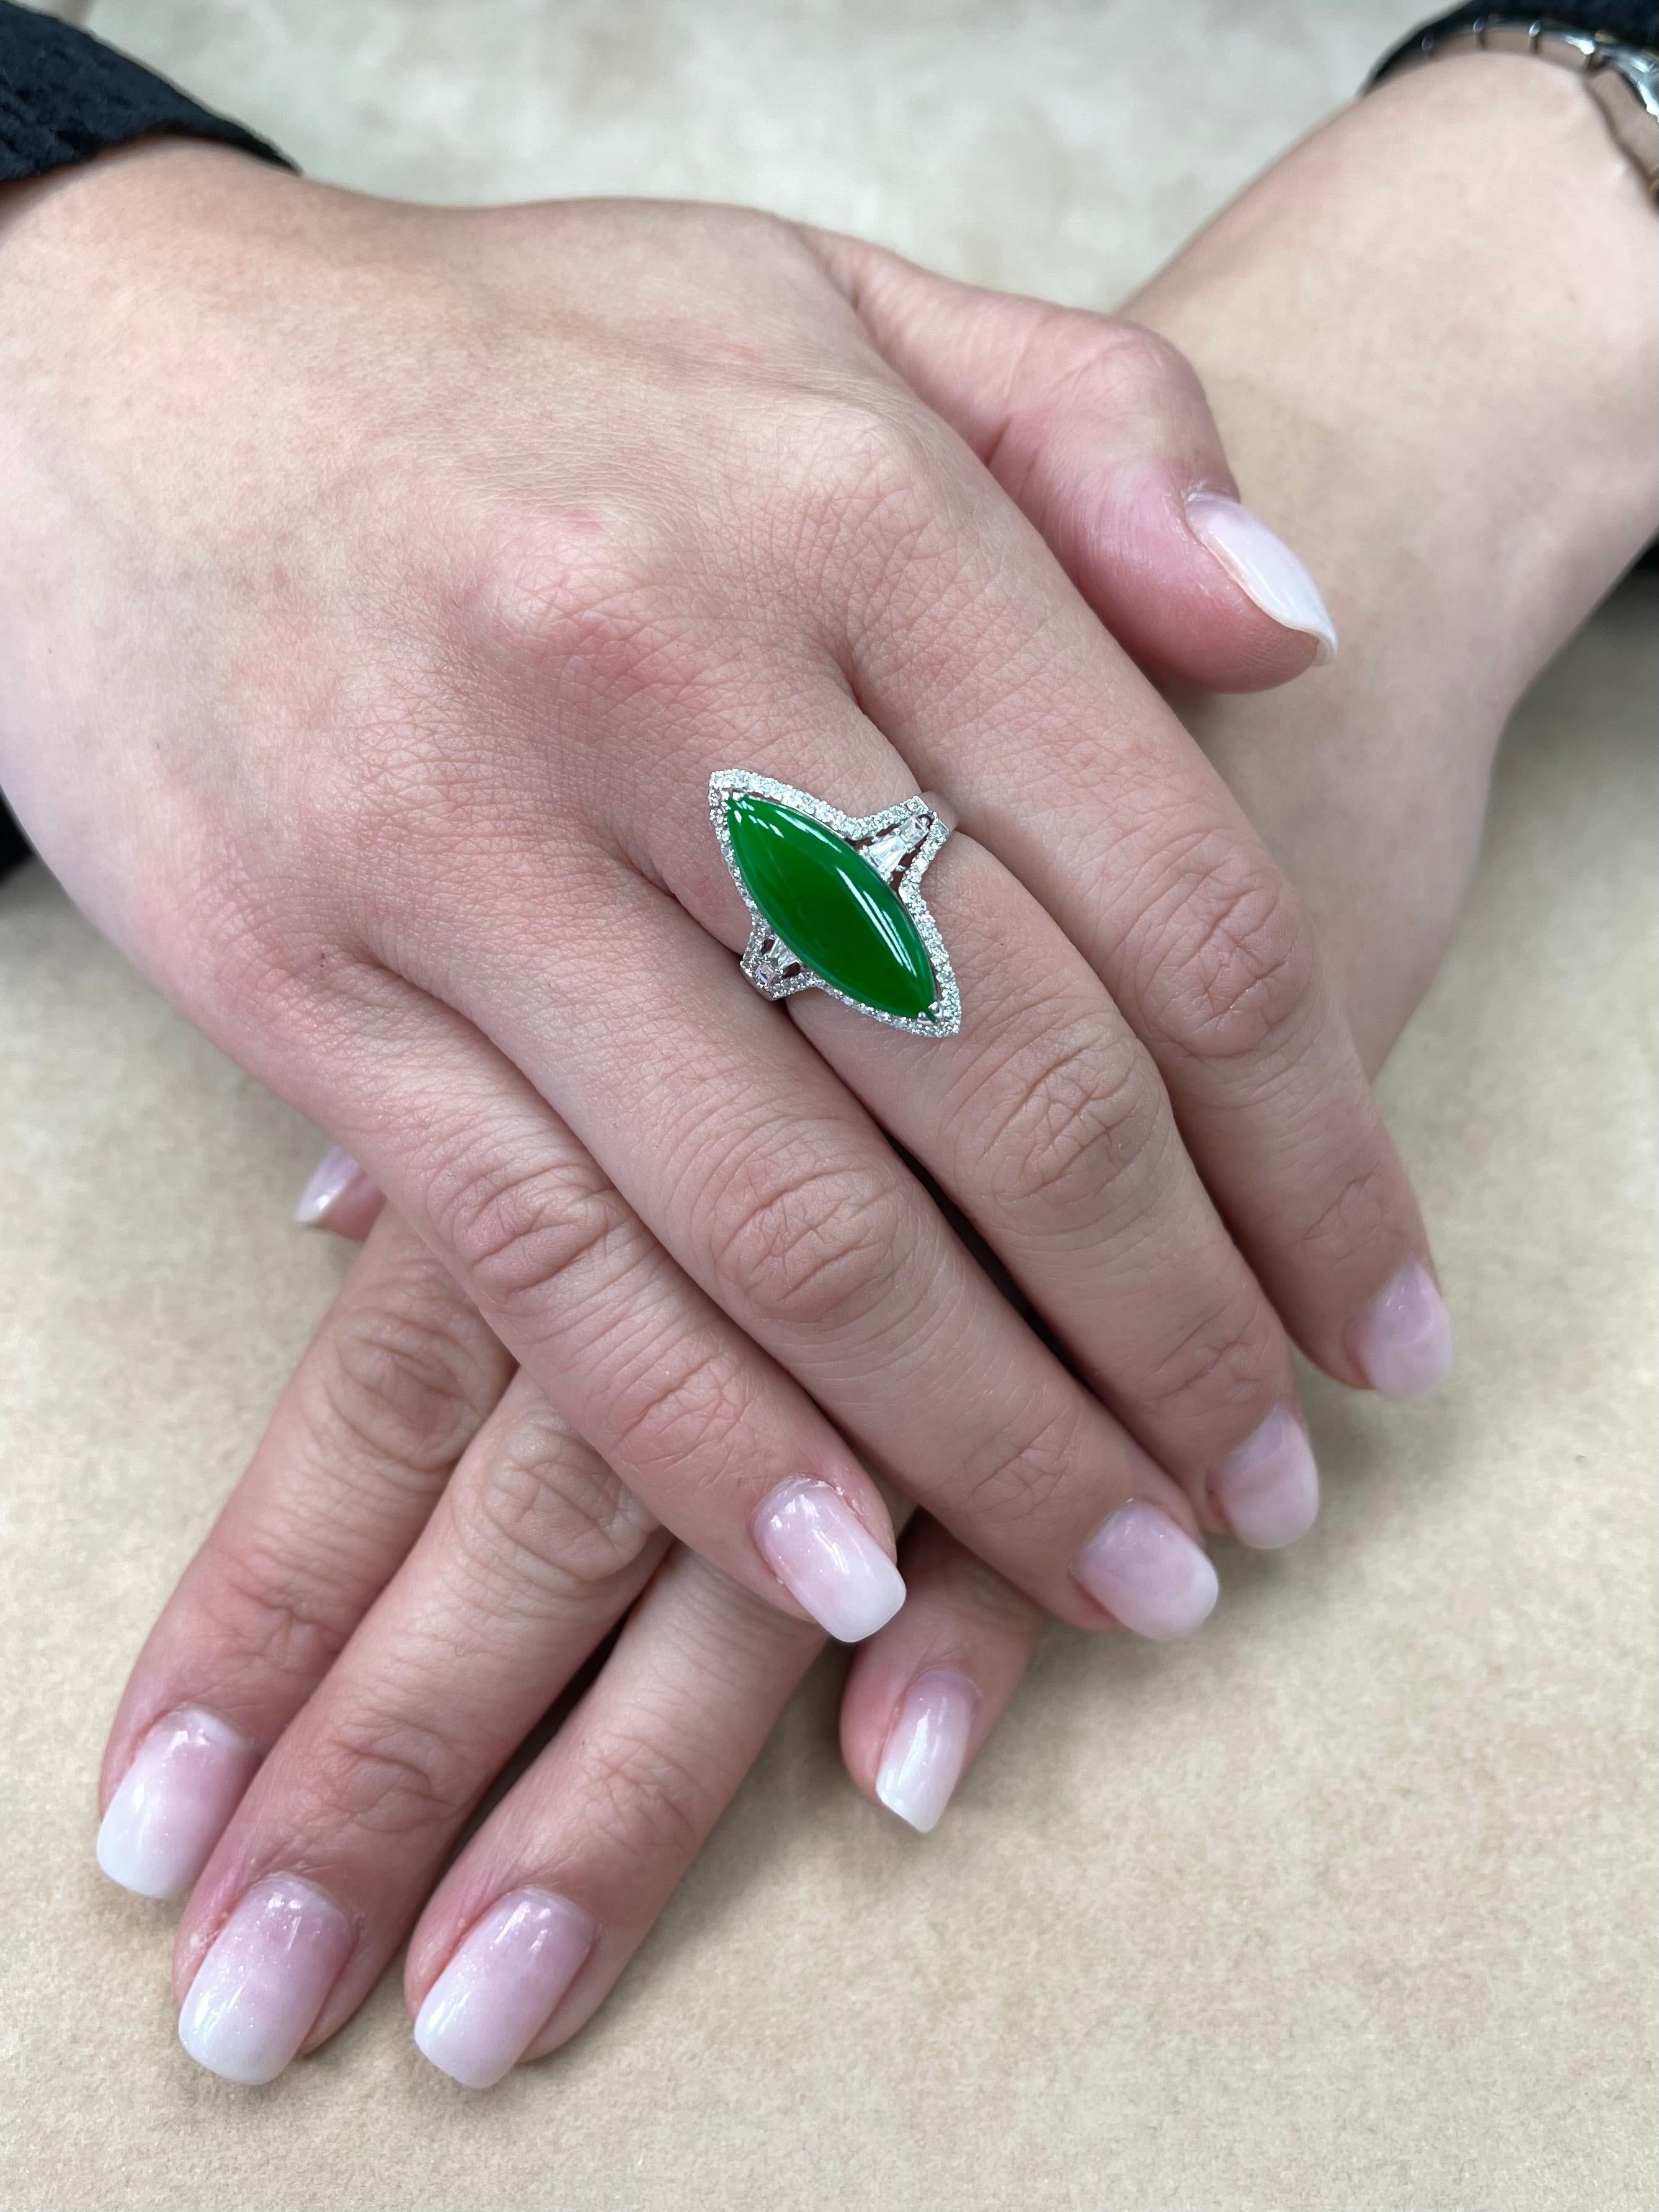 Here is an intense apple green Jade and diamond ring. It is certified. The ring is set in 18k white gold and diamonds. There are 0.508cts total of diamonds that surrounds the intense apple jade center stone. There are more diamonds on the shank of